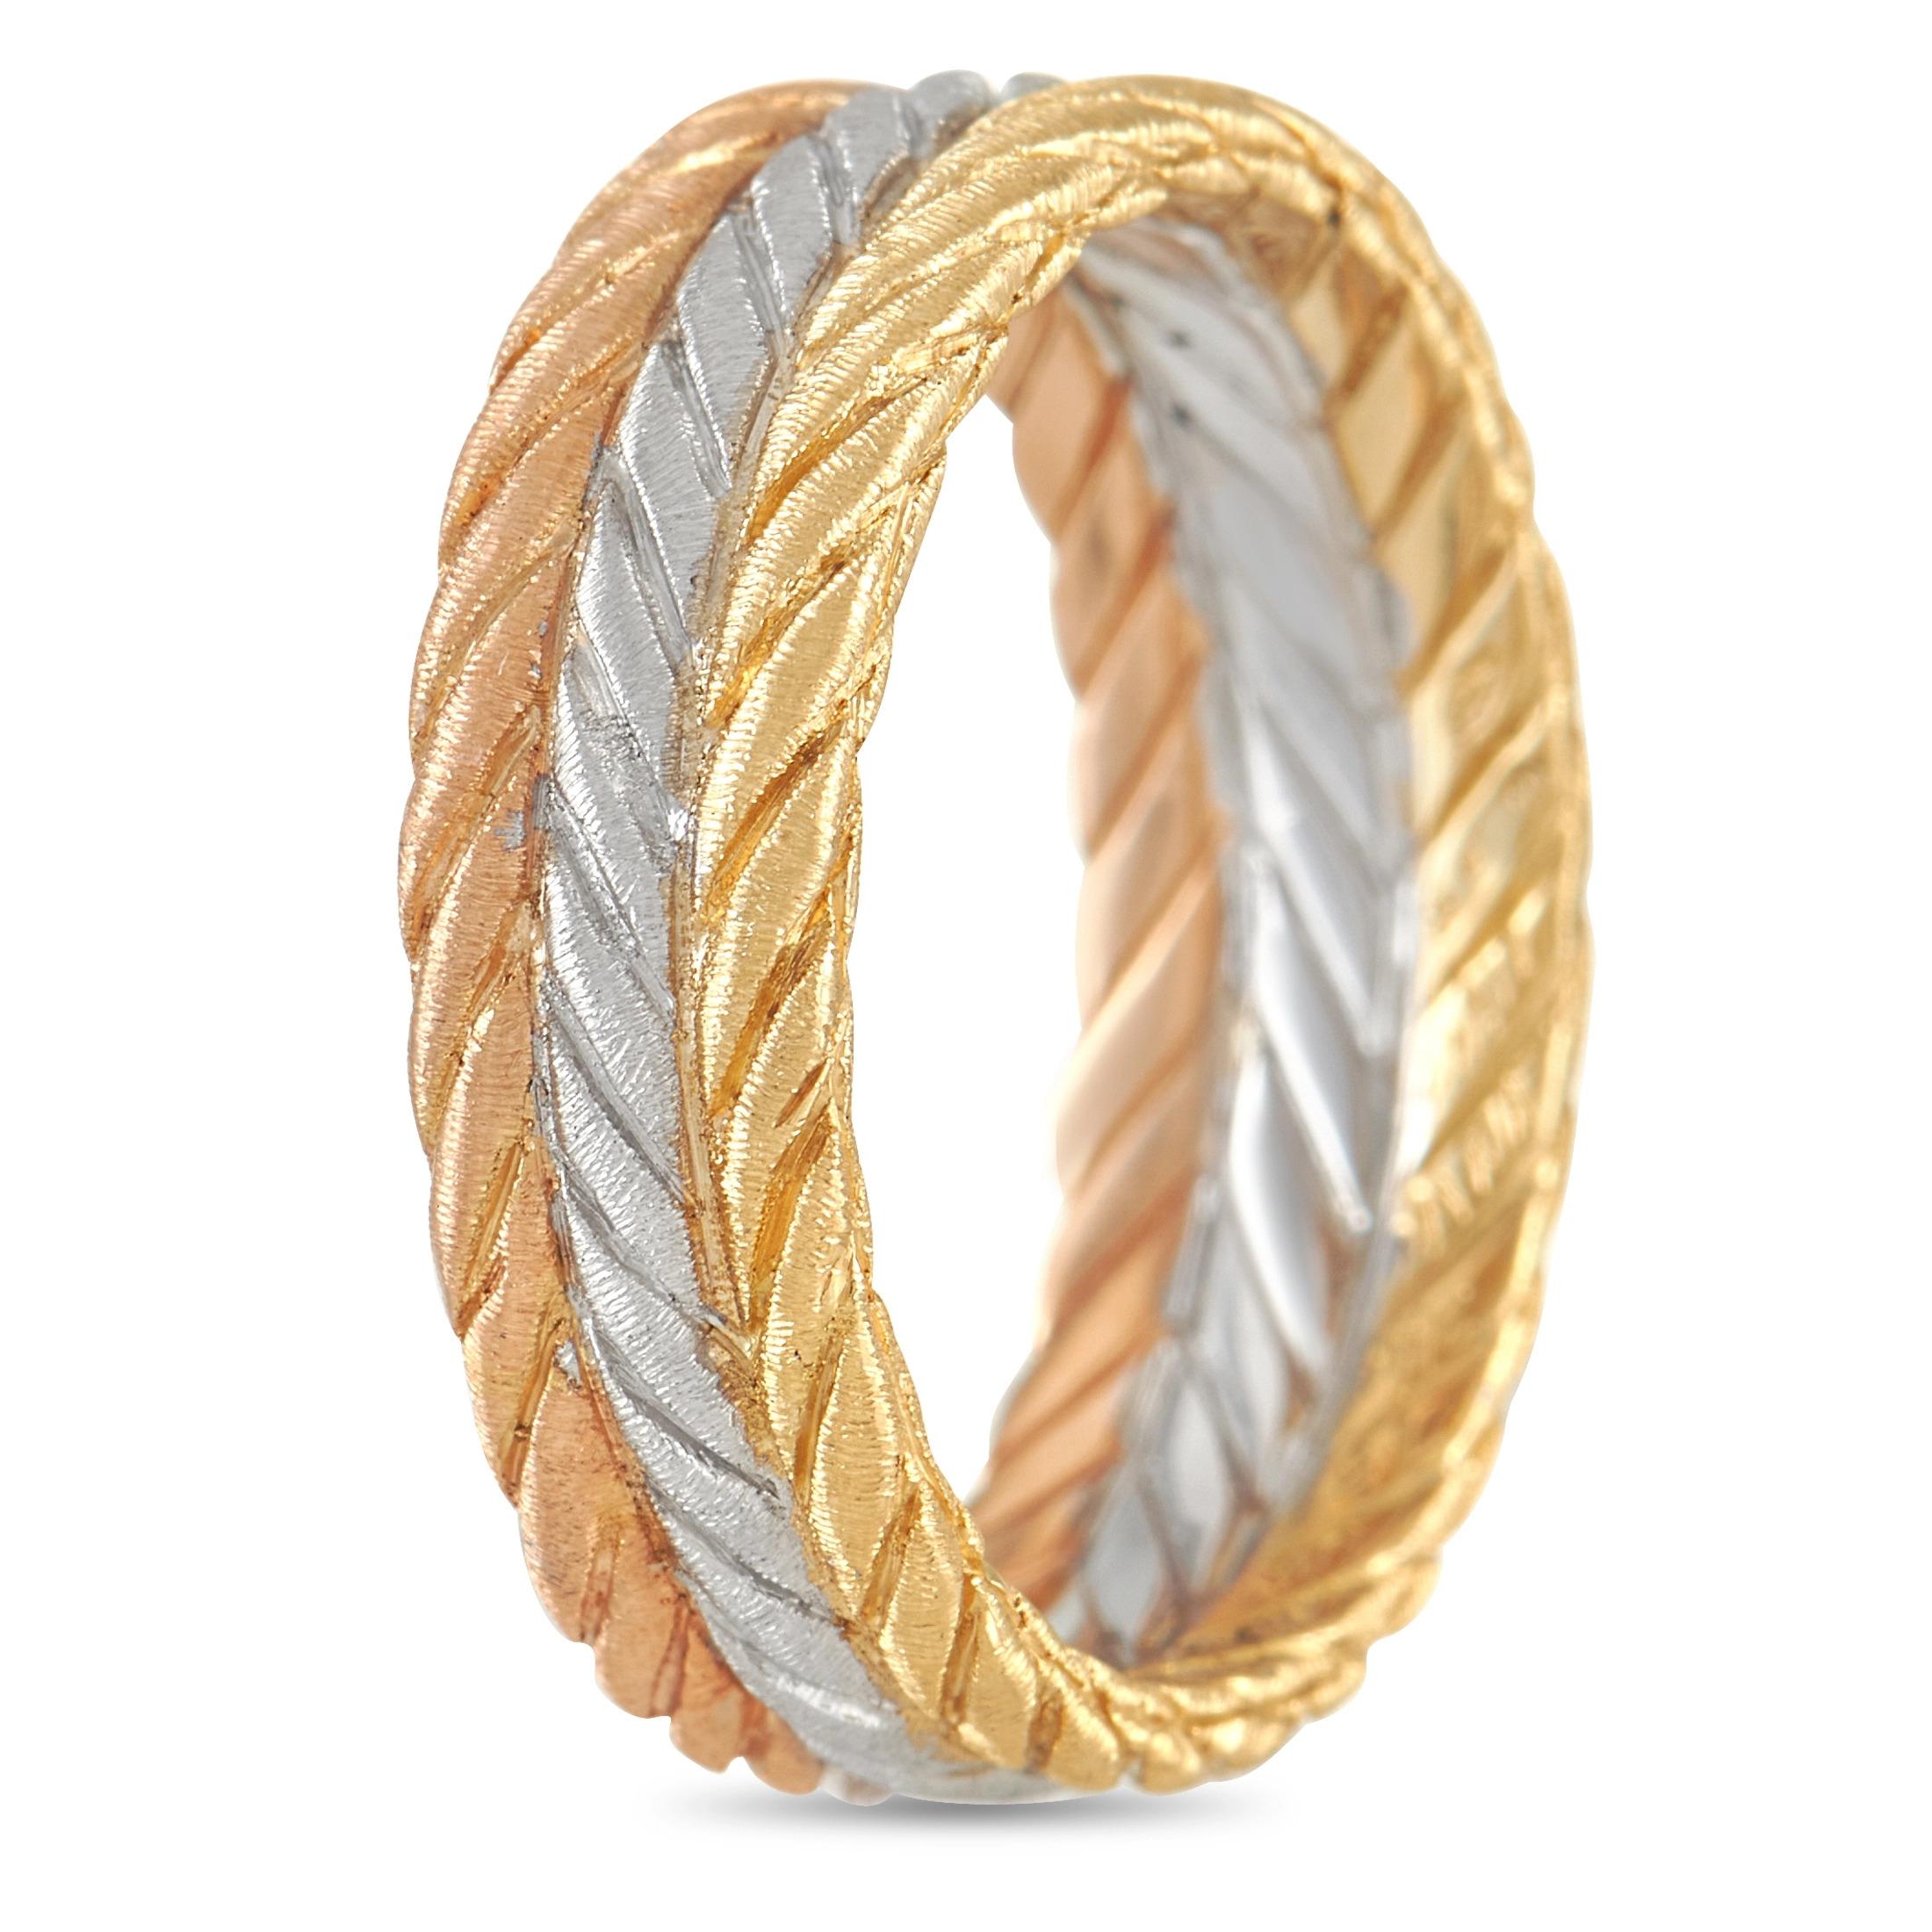 The tricolor ring worth treasuring. The Buccellati Tricolor 18K Yellow, Rose, White Gold Braided Ring features three bands crafted in three different materials showcasing one distinctive style. In braided fashion, the yellow gold, white gold, and